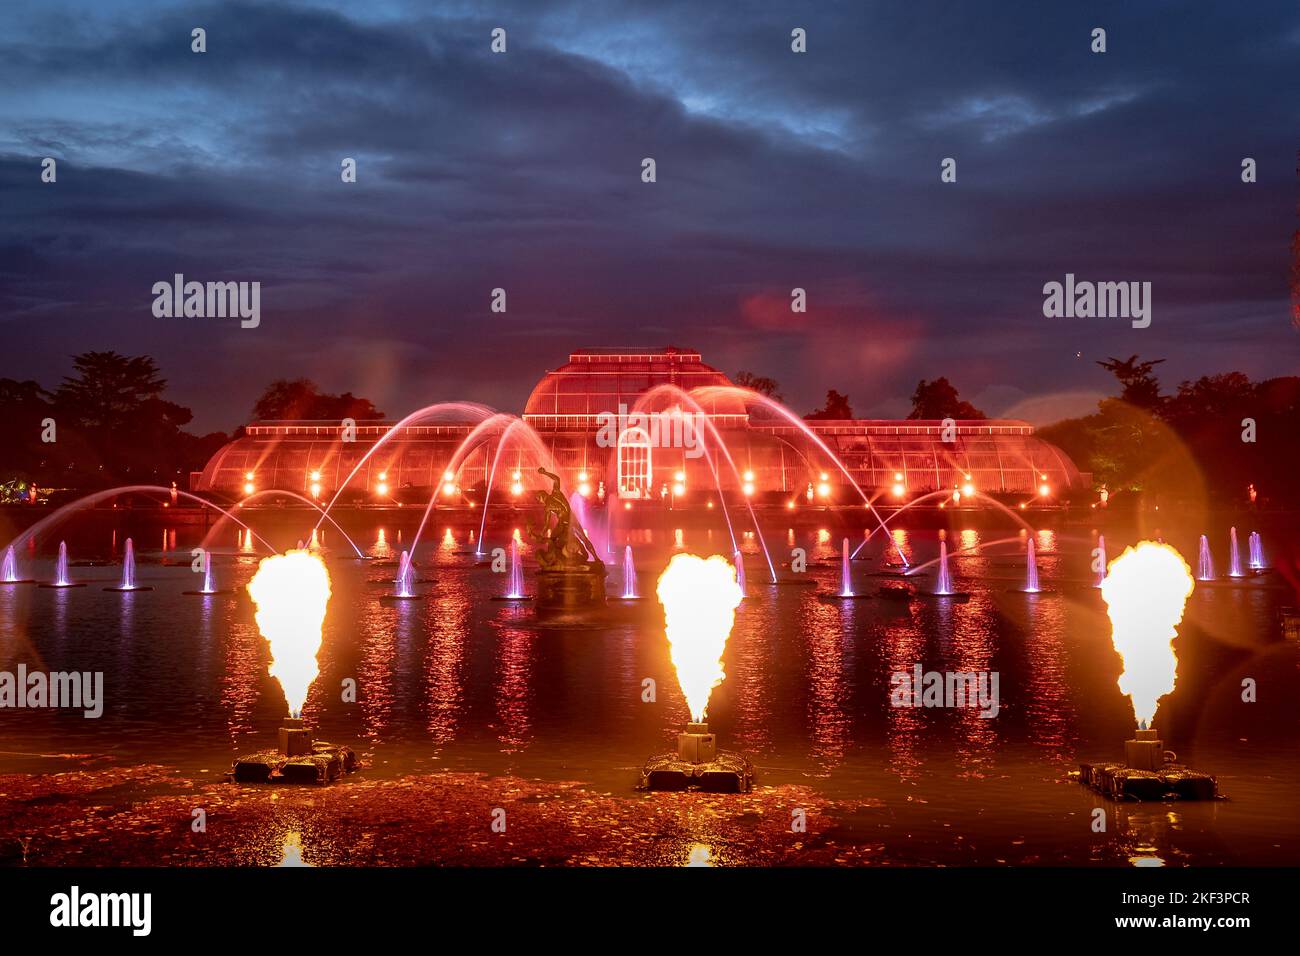 London, UK. 15th Nov 2022. Kew Christmas Lights. Now in its tenth year, Kew’s after-dark winter lights trail sees immersive lighting trails, installations and interactive multi-sensory illumination bringing the botanical garden landscape to life. Credit: Guy Corbishley/Alamy Live News Stock Photo